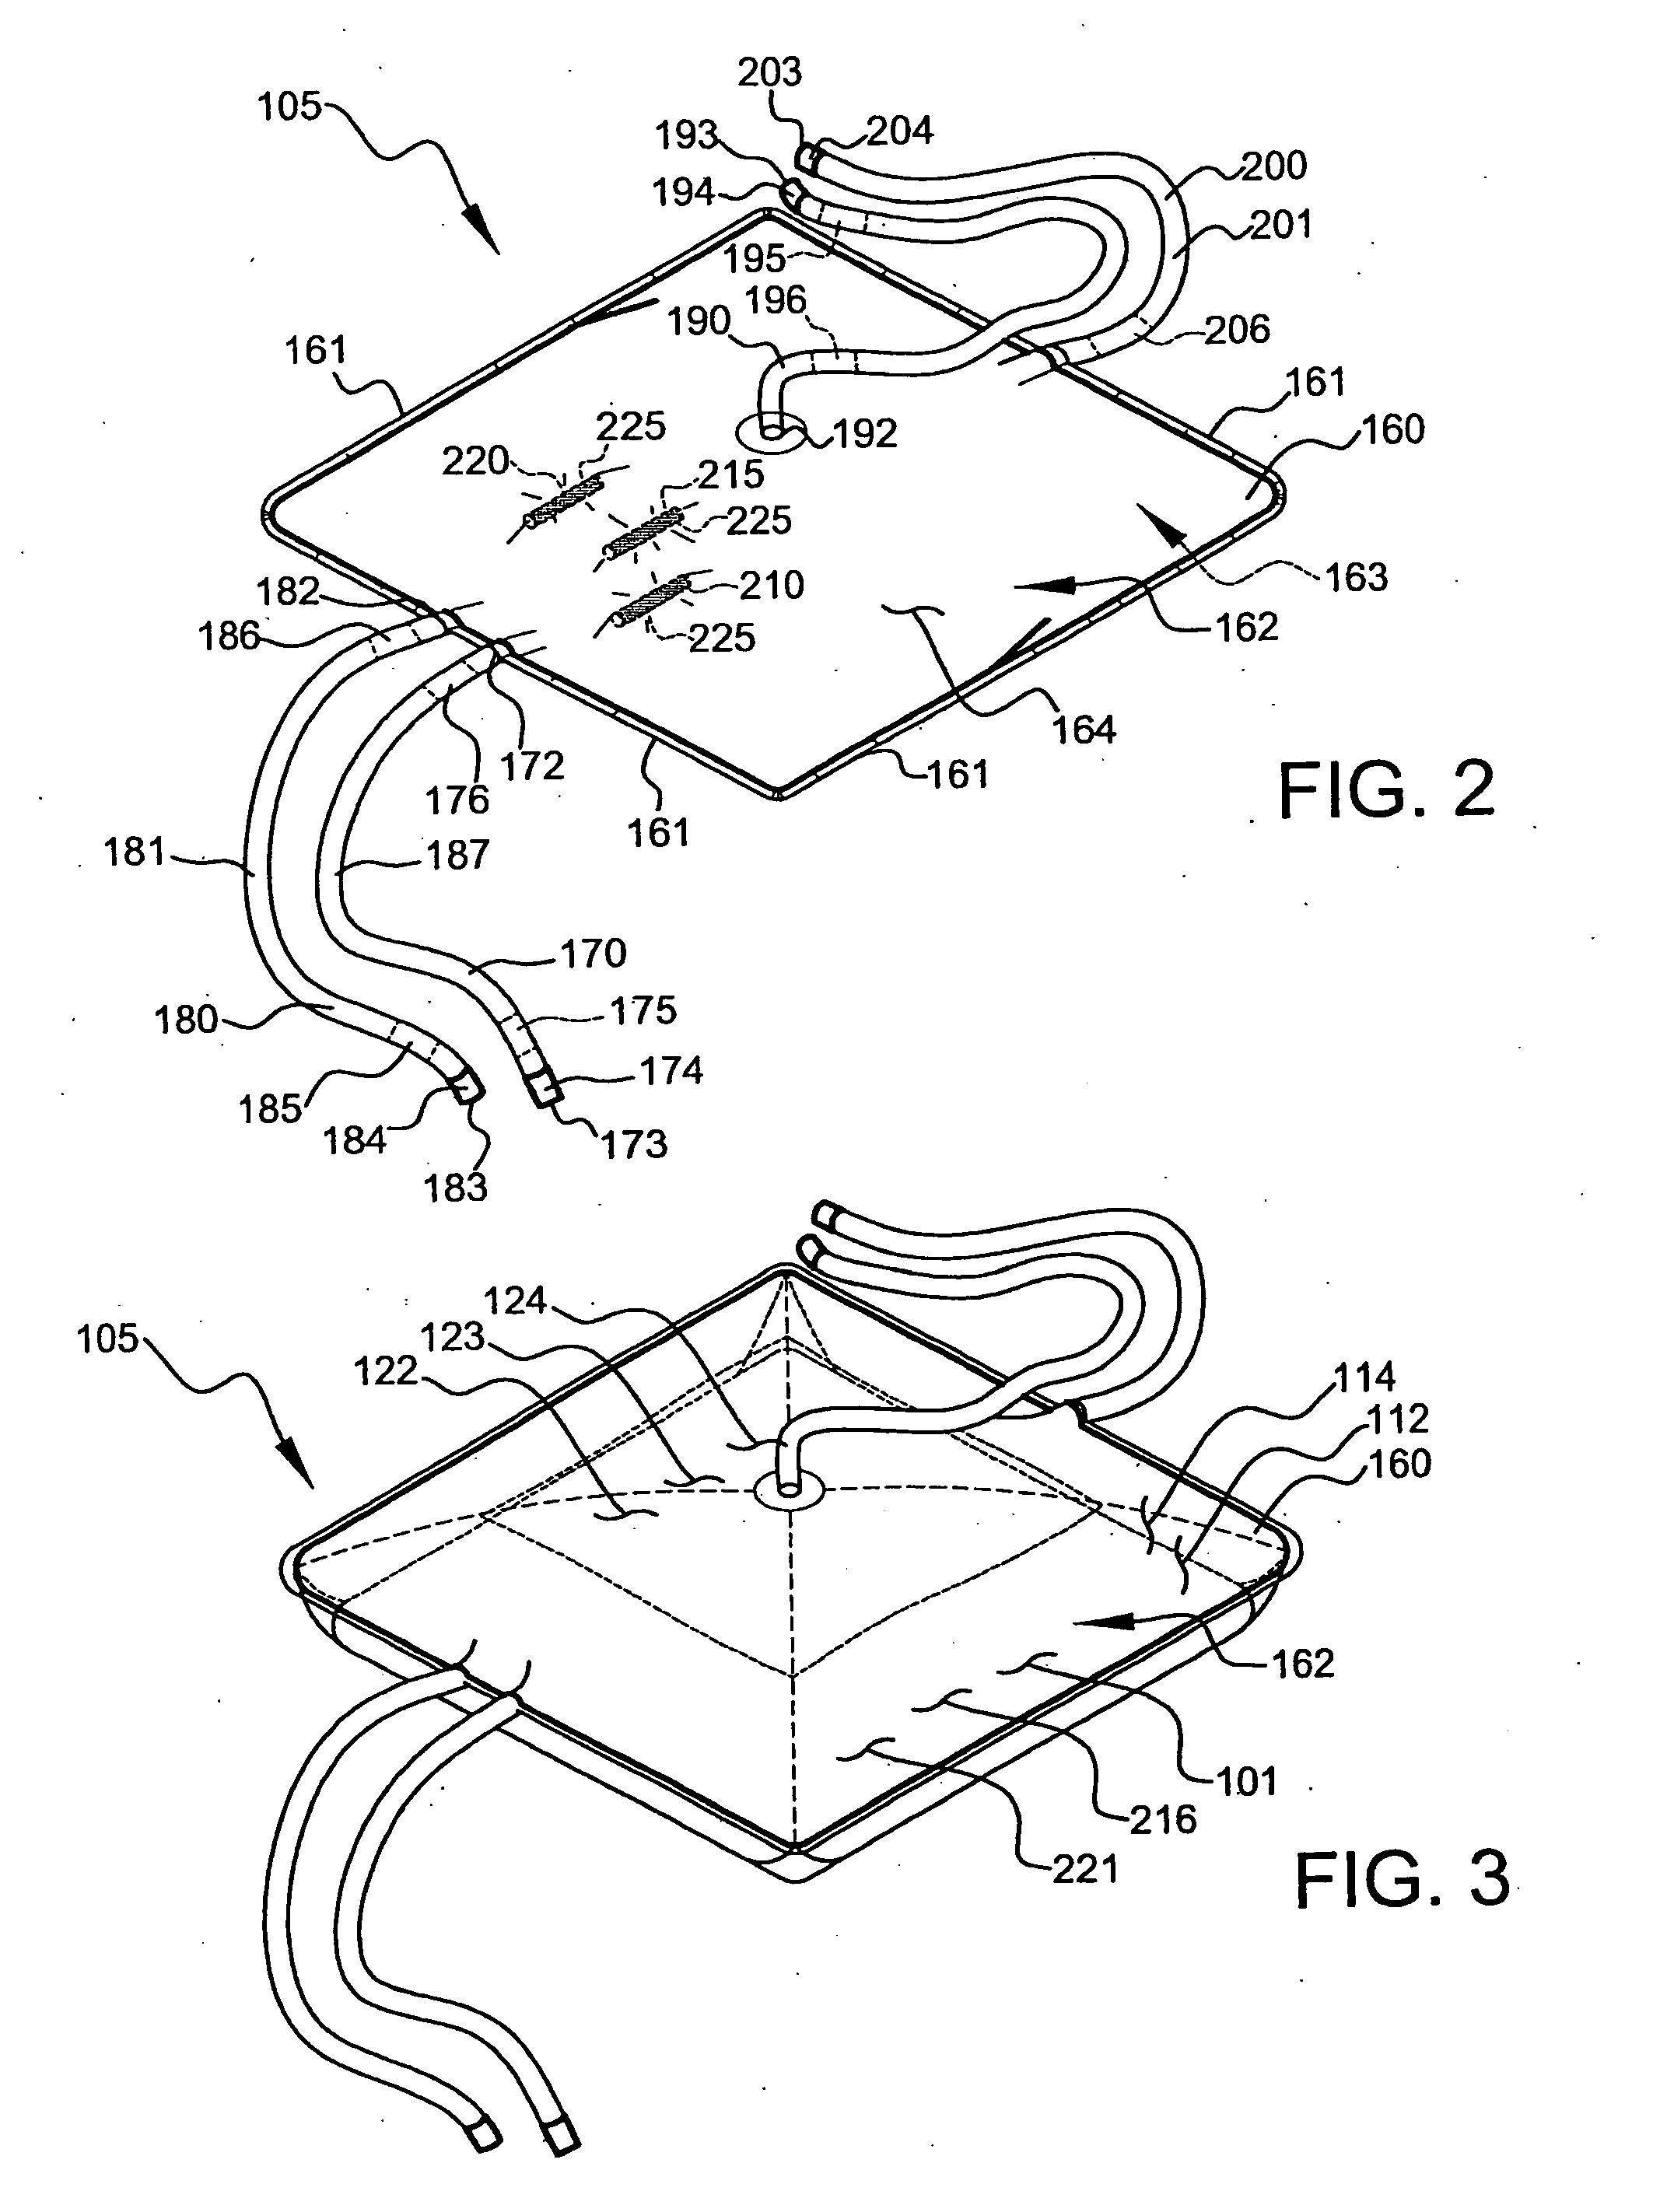 Method and system for bioreaction